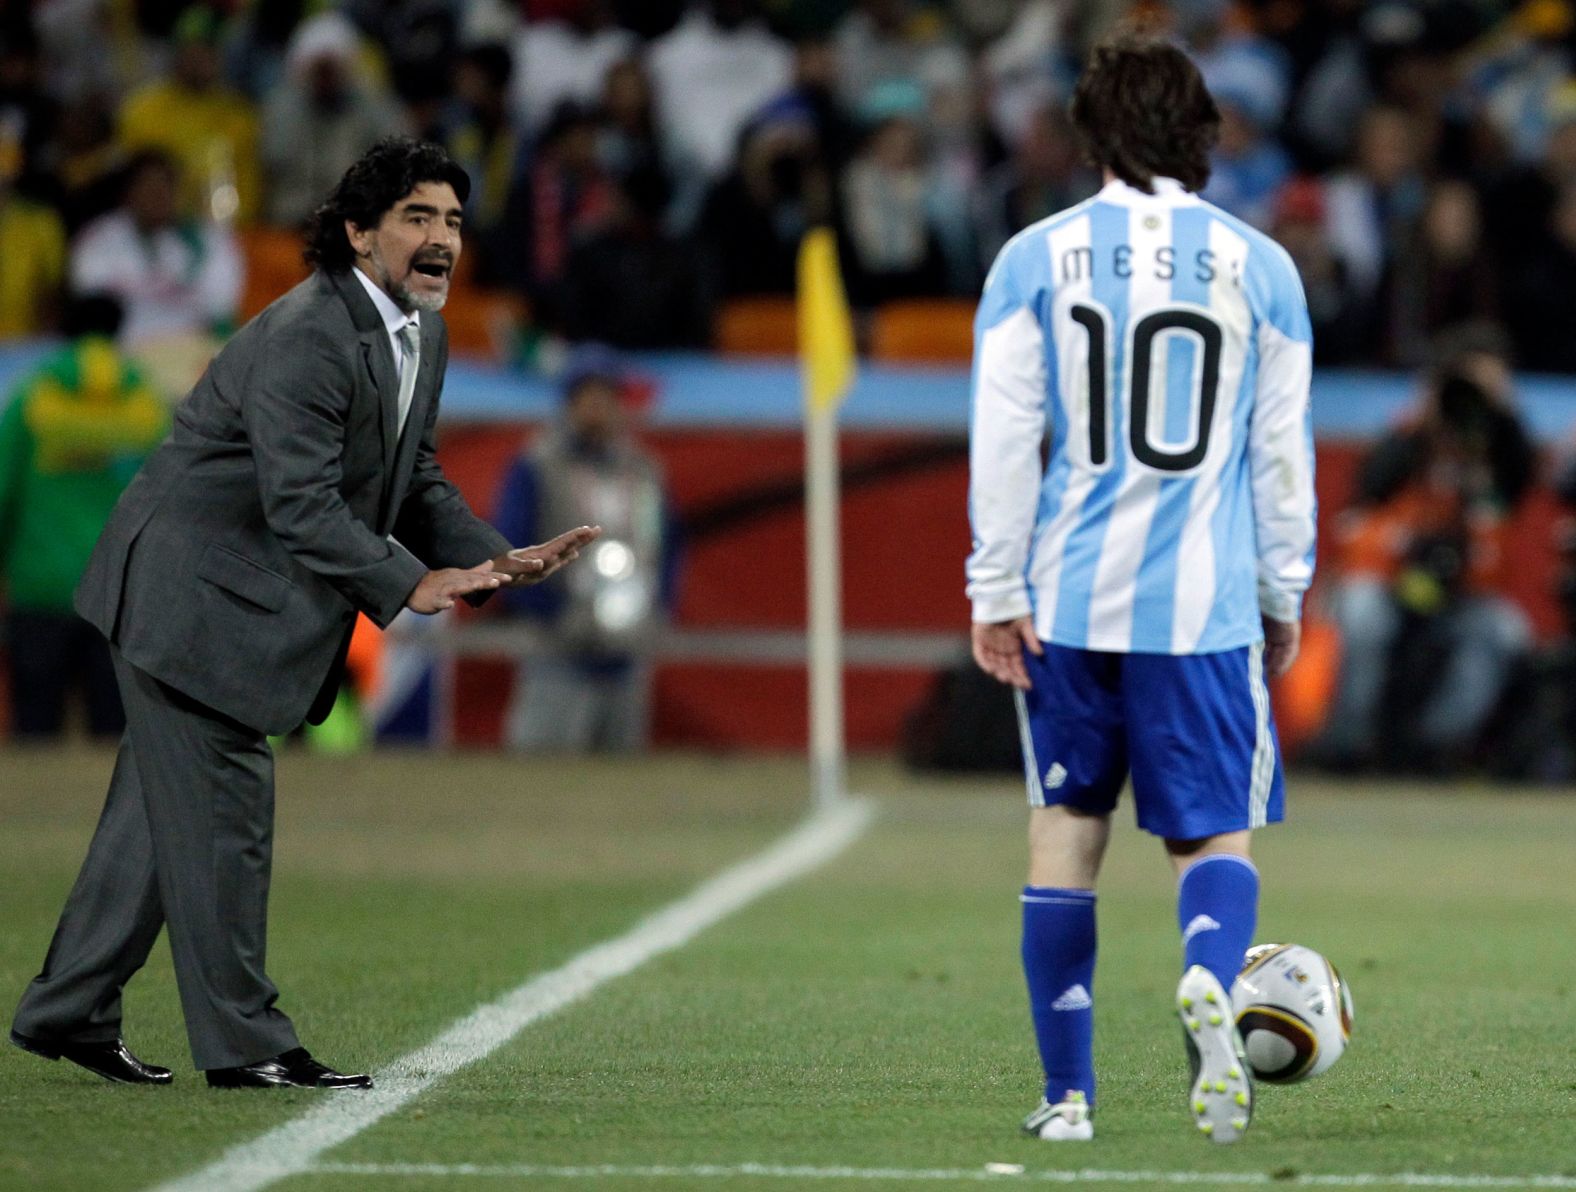 Maradona gives instructions to Argentina star Lionel Messi during a match at the 2010 World Cup.